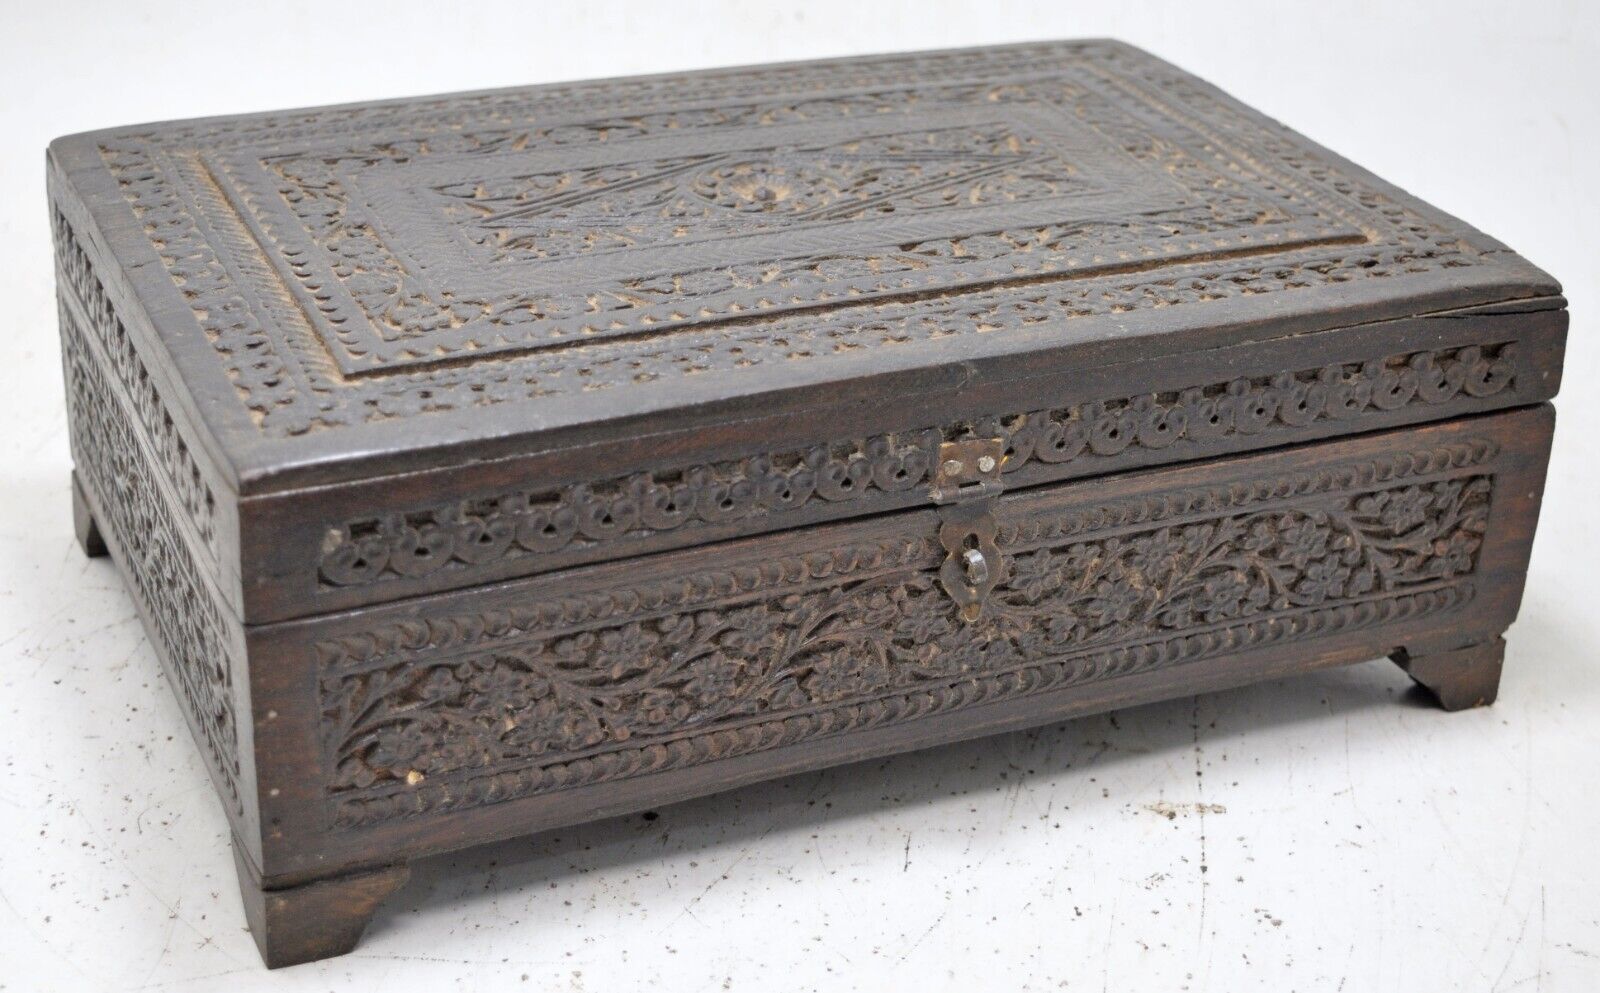 Antique Wooden Storage Chest Box Original Old Hand Crafted Fine Floral Carved